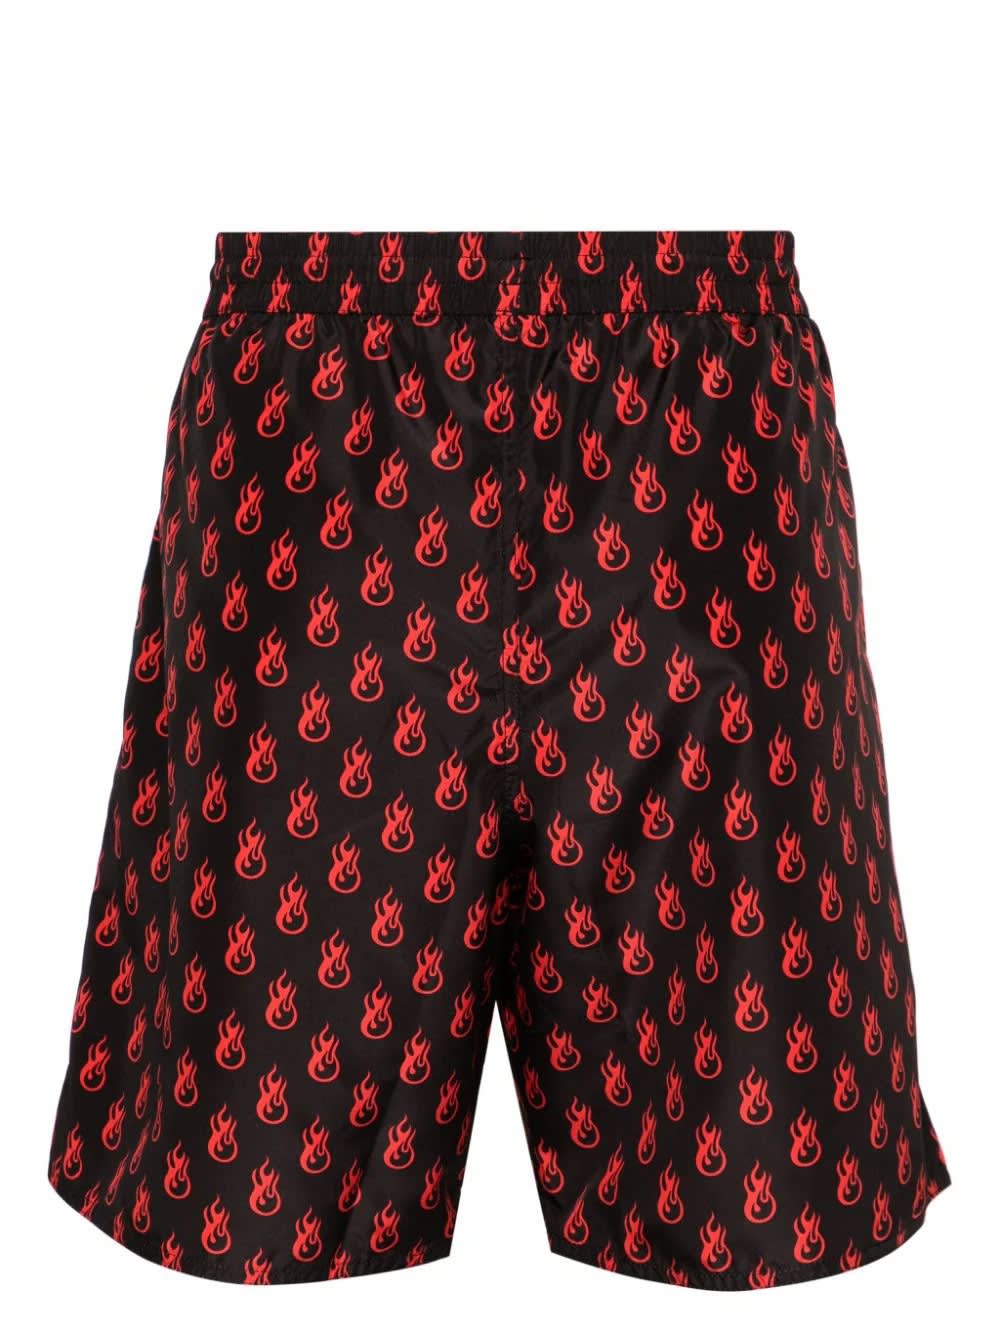 Shop Vision Of Super Black Swimwear With Red Flames Pattern